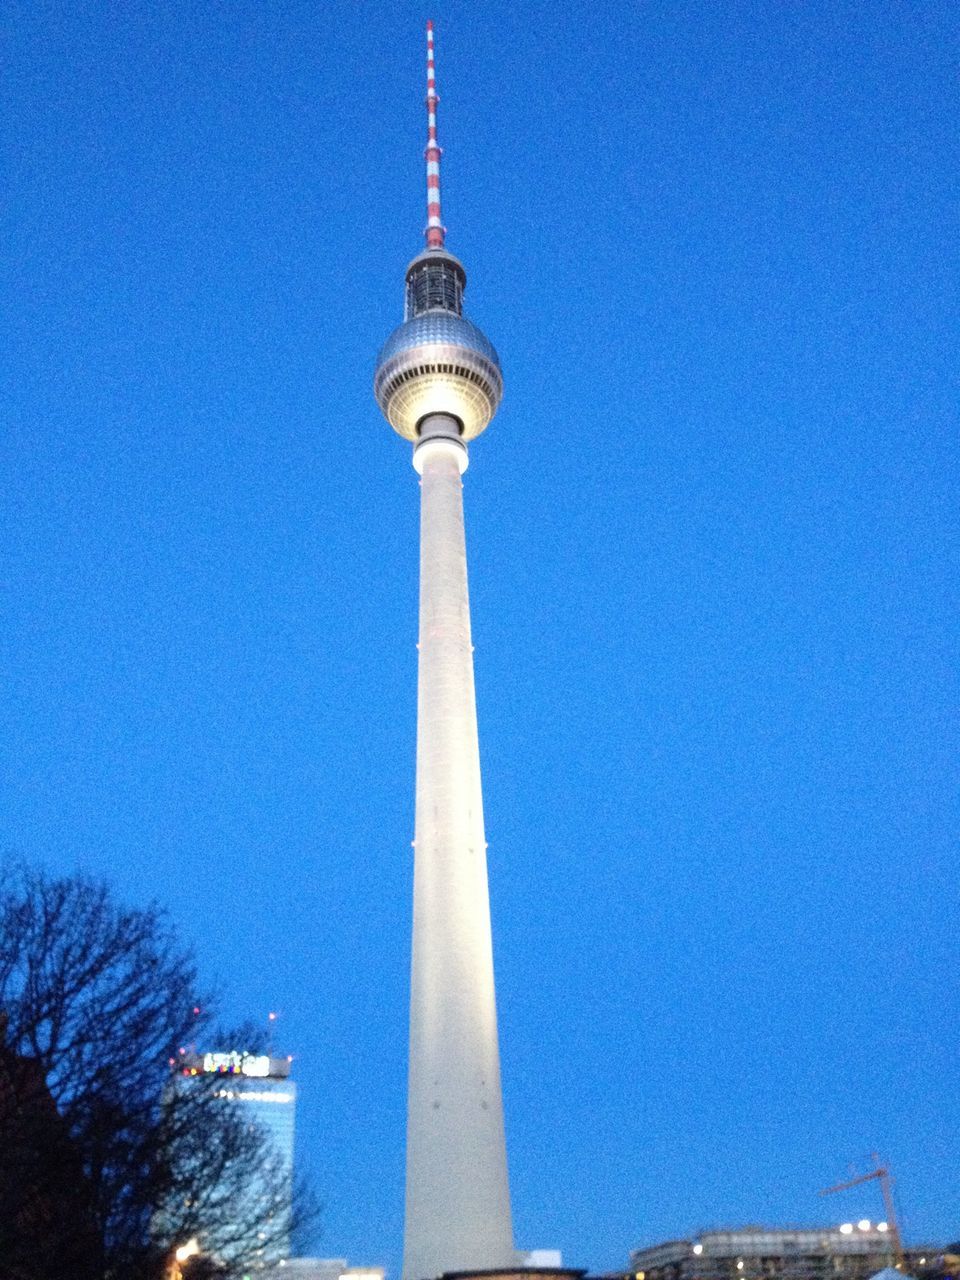 tower, communications tower, tall - high, international landmark, built structure, architecture, famous place, travel destinations, tourism, capital cities, travel, building exterior, spire, blue, television tower, low angle view, clear sky, fernsehturm, communication, culture